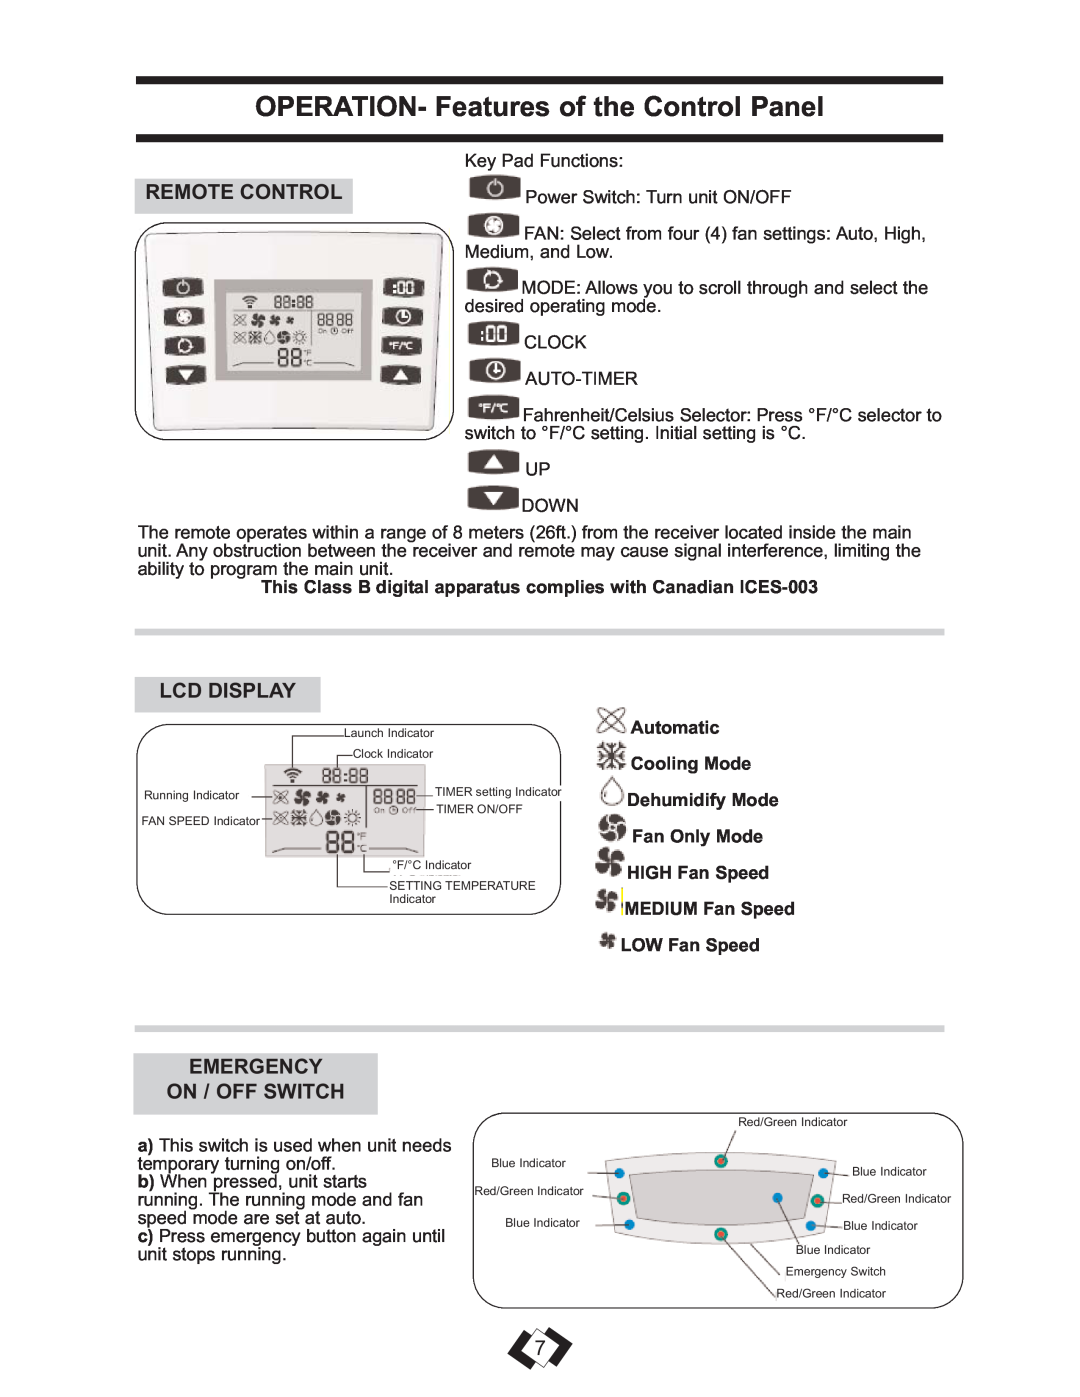 Danby DPAC 13009 OPERATION- Features of the Control Panel, Remote Control, Lcd Display, Emergency On / Off Switch 